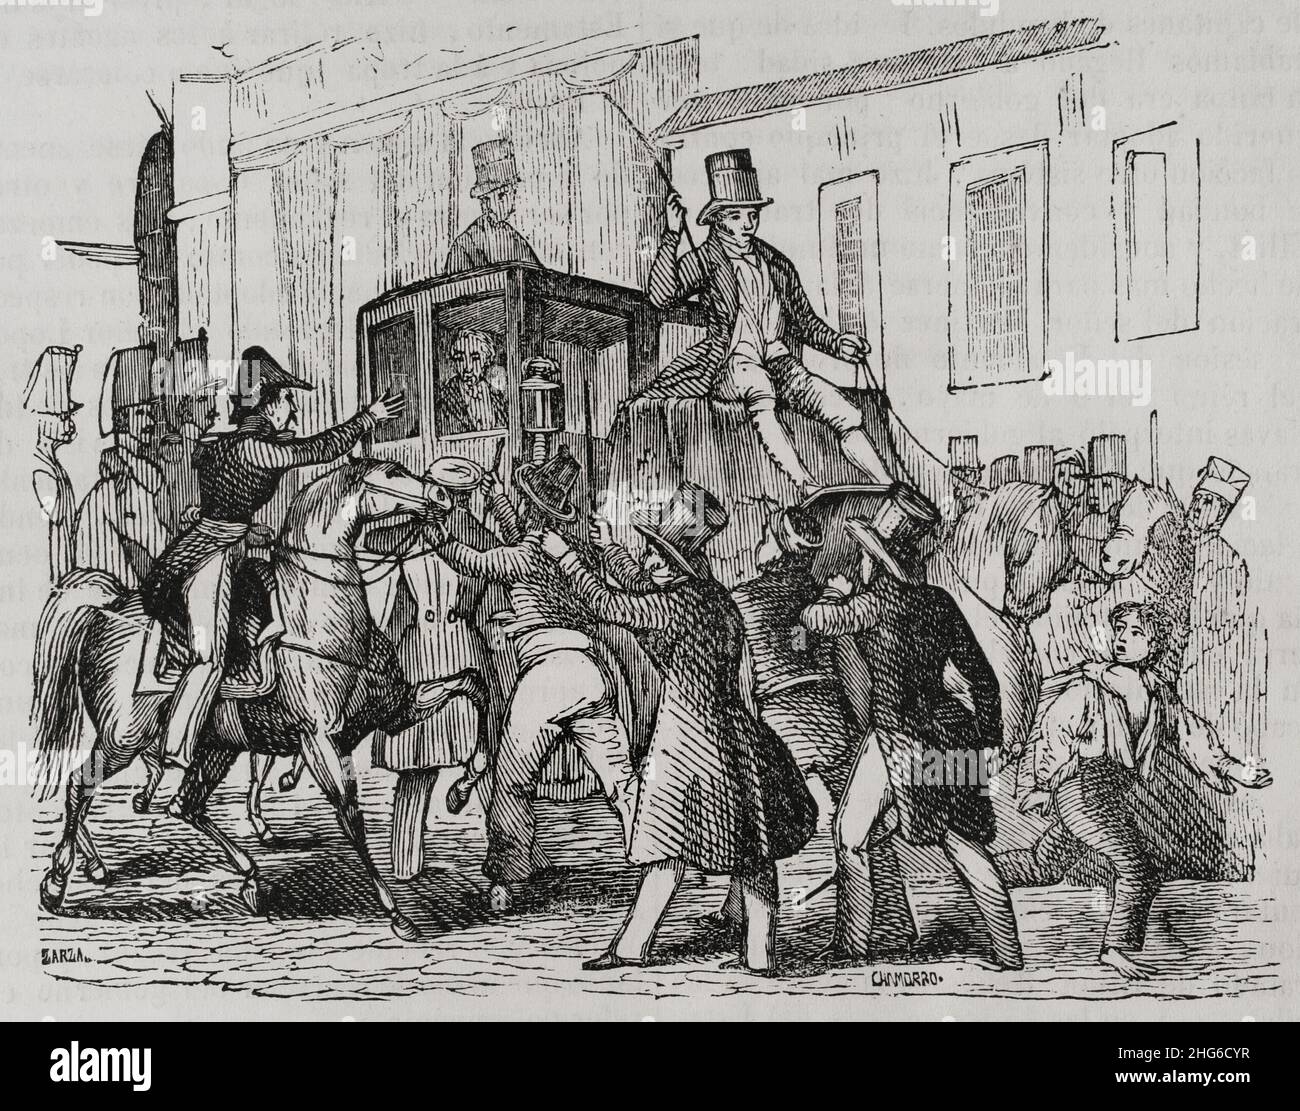 History of Spain. Government of Francisco Martínez de la Rosa (January 15, 1834 to June 7, 1835). At the end of the parliamentary session on May 10, 1835, where the government was accused by the treaty known as Eliot Treaty, a crowd broke into Martínez de la Rosa's carriage. Attack on Martínez de la Rosa. Illustration by Zarza. Engraving by Chamorro. Panorama Español, Crónica Contemporánea. Volume III. Madrid, 1845. Author: Eusebio Zarza (1842-1881). Spanish artist. Chamorro. 19th century-Spanish engraver. Stock Photo